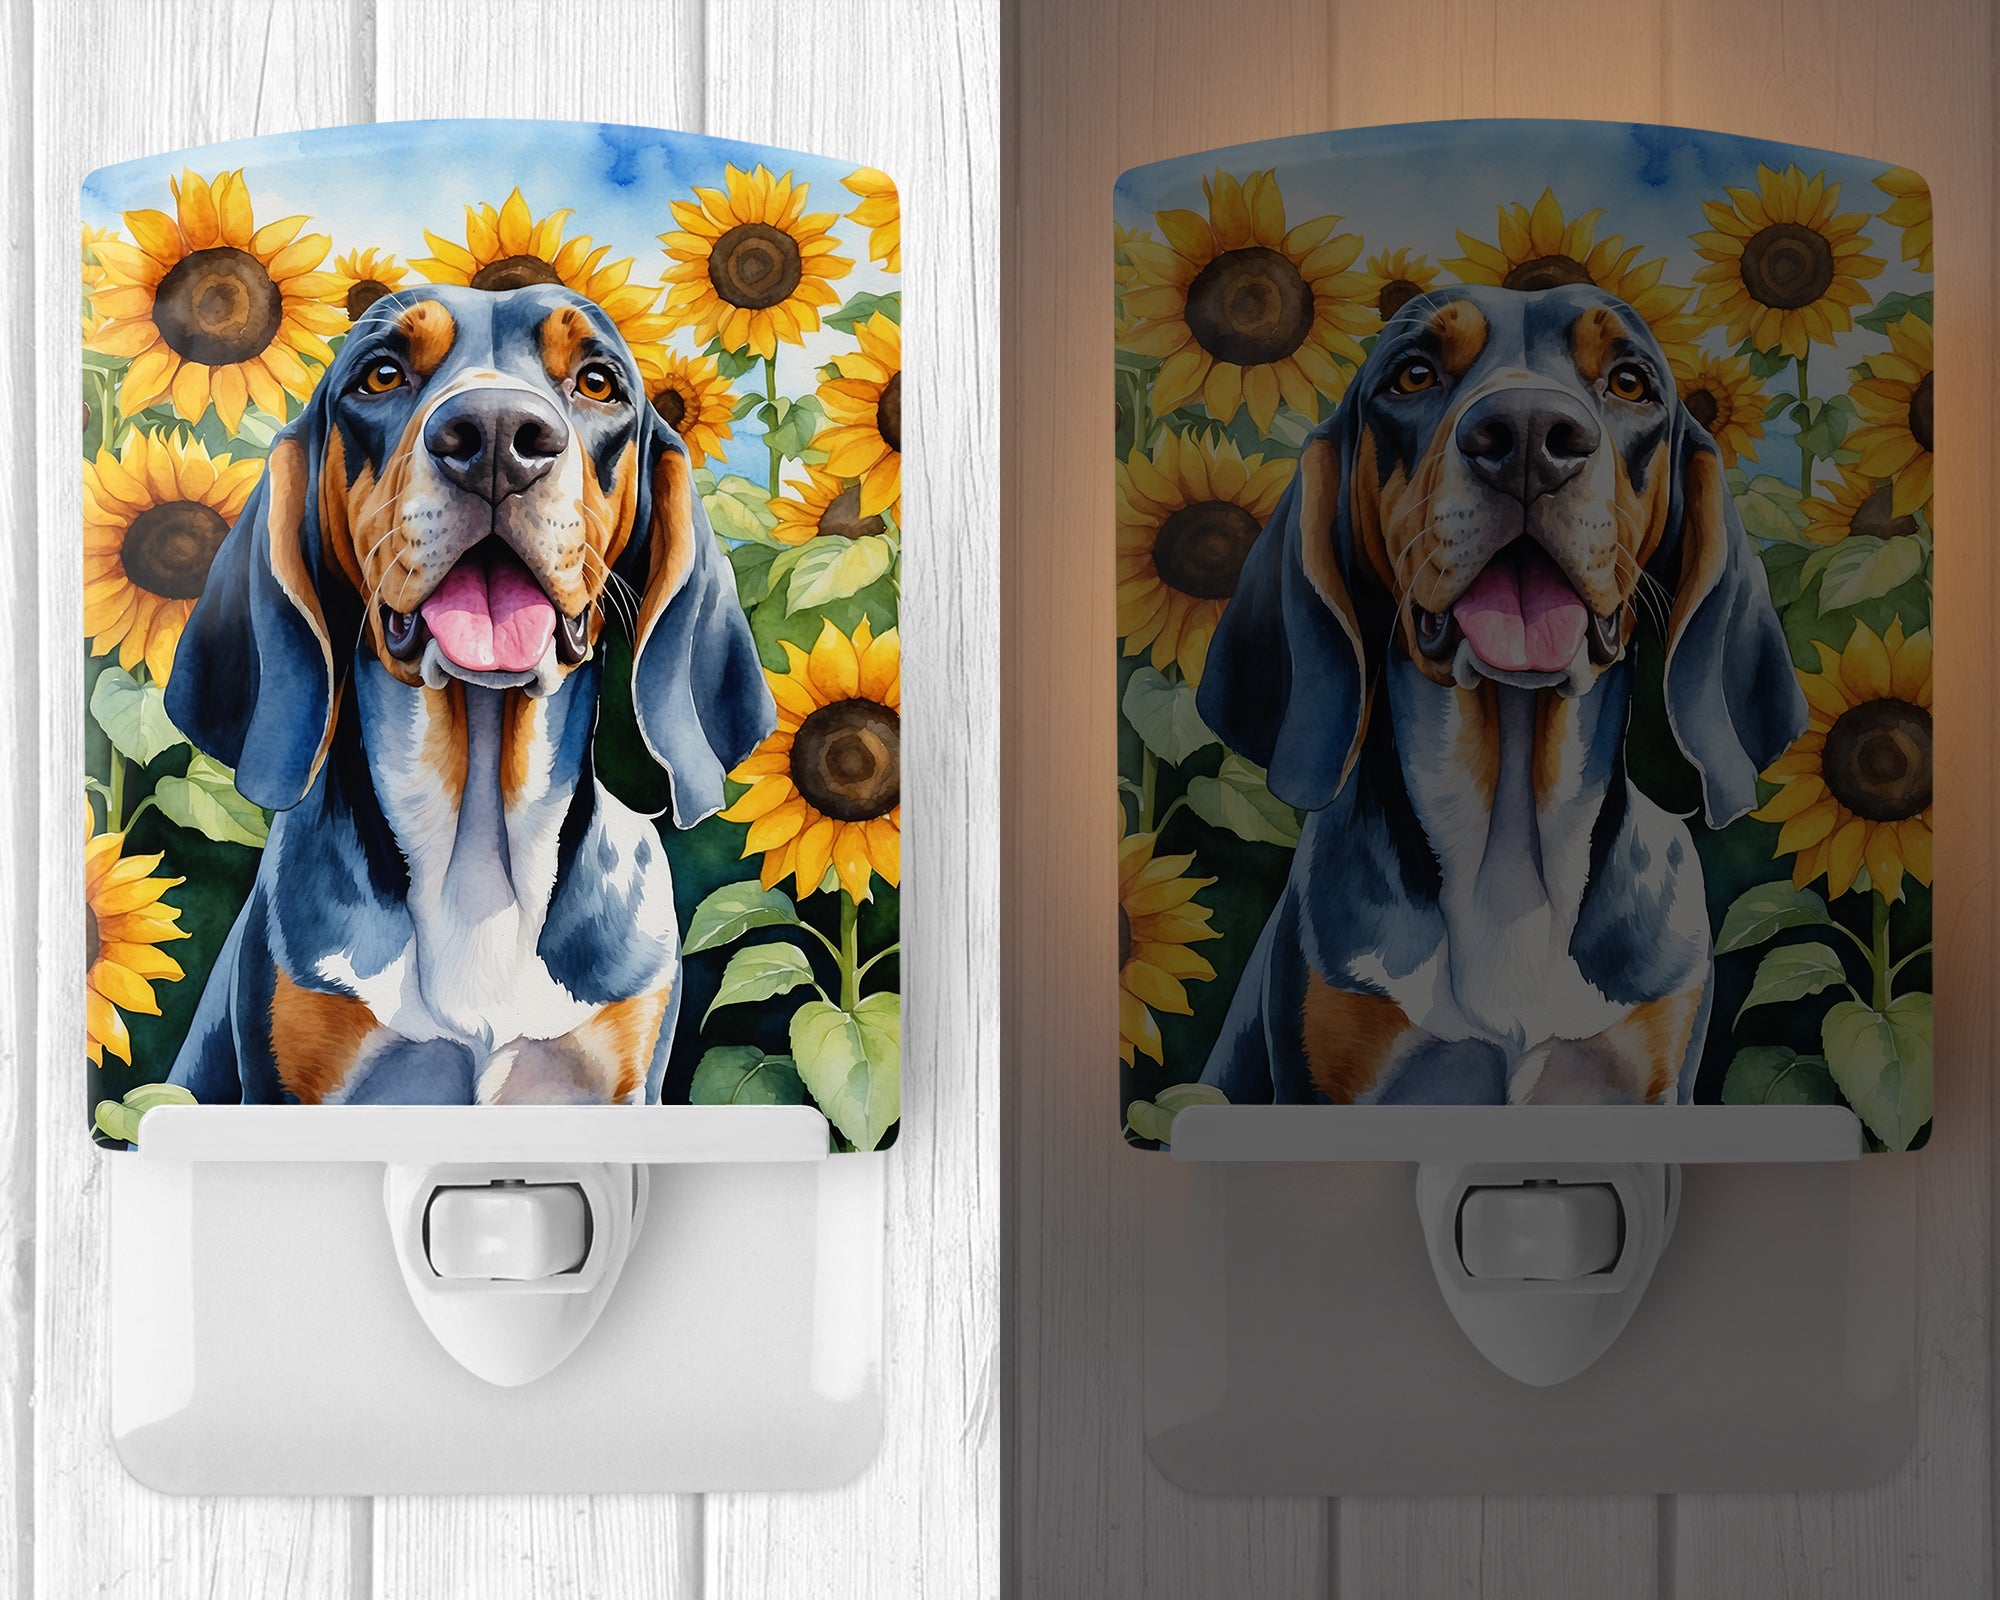 Buy this American English Coonhound in Sunflowers Ceramic Night Light